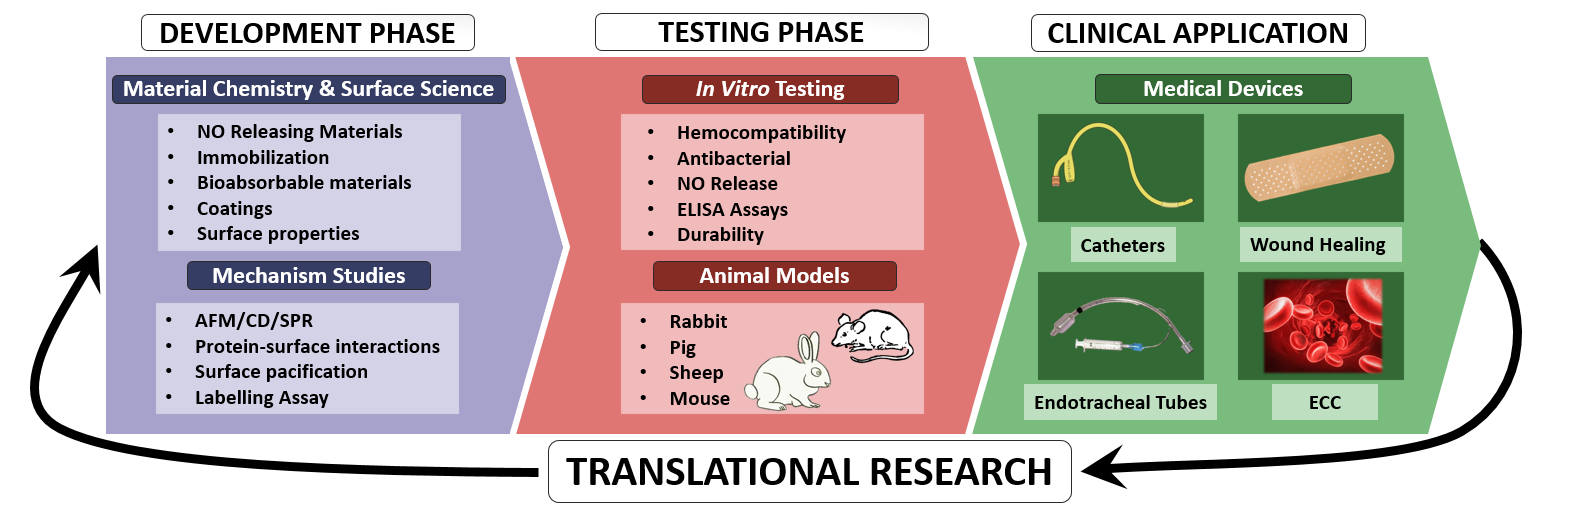 translational research figure for website (cropped)